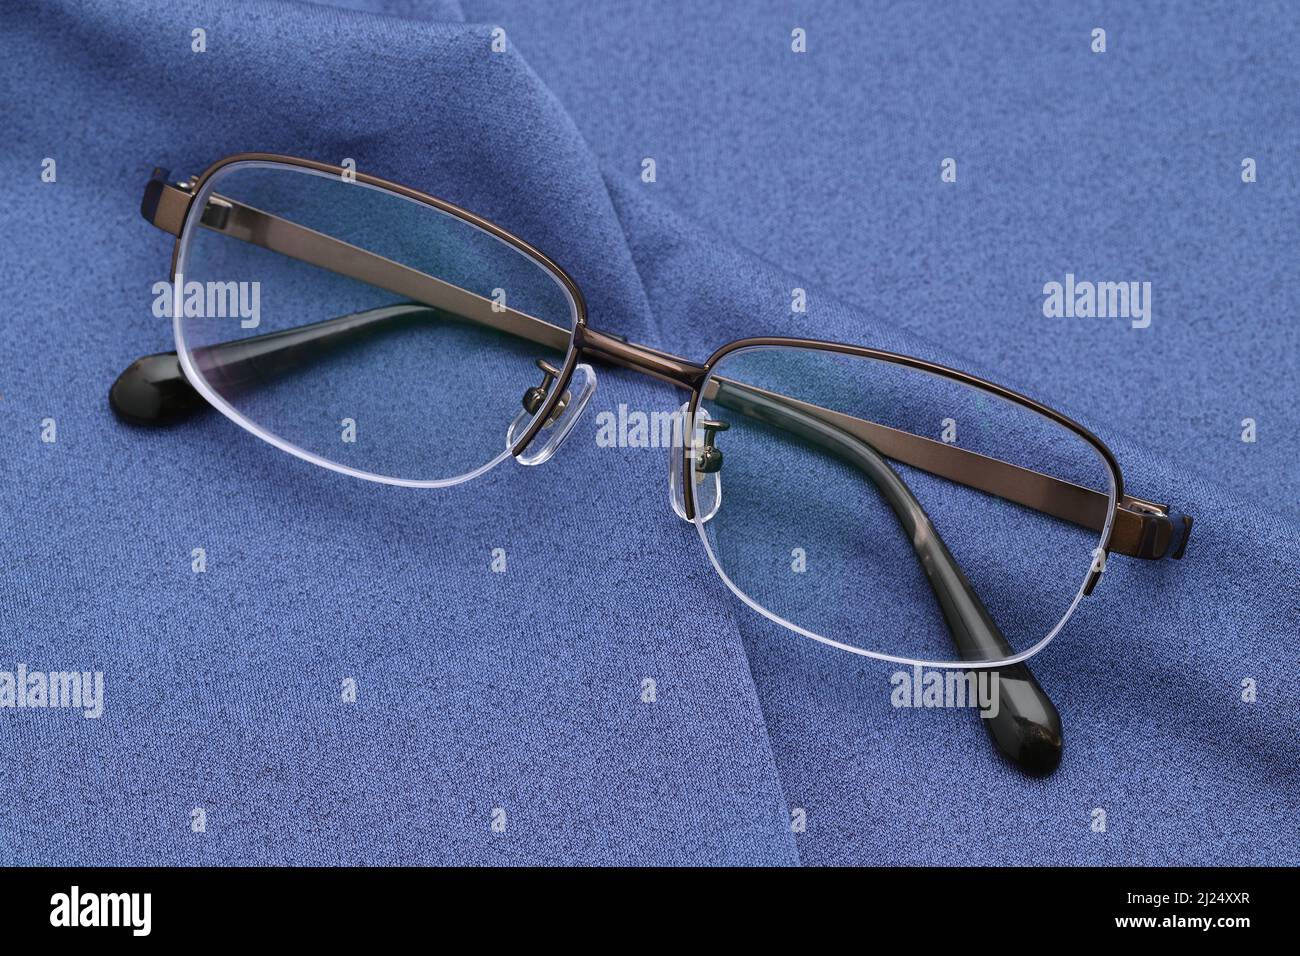 Stylish eyesight glasses and blue glass cleaning cloth backgrond Stock Photo